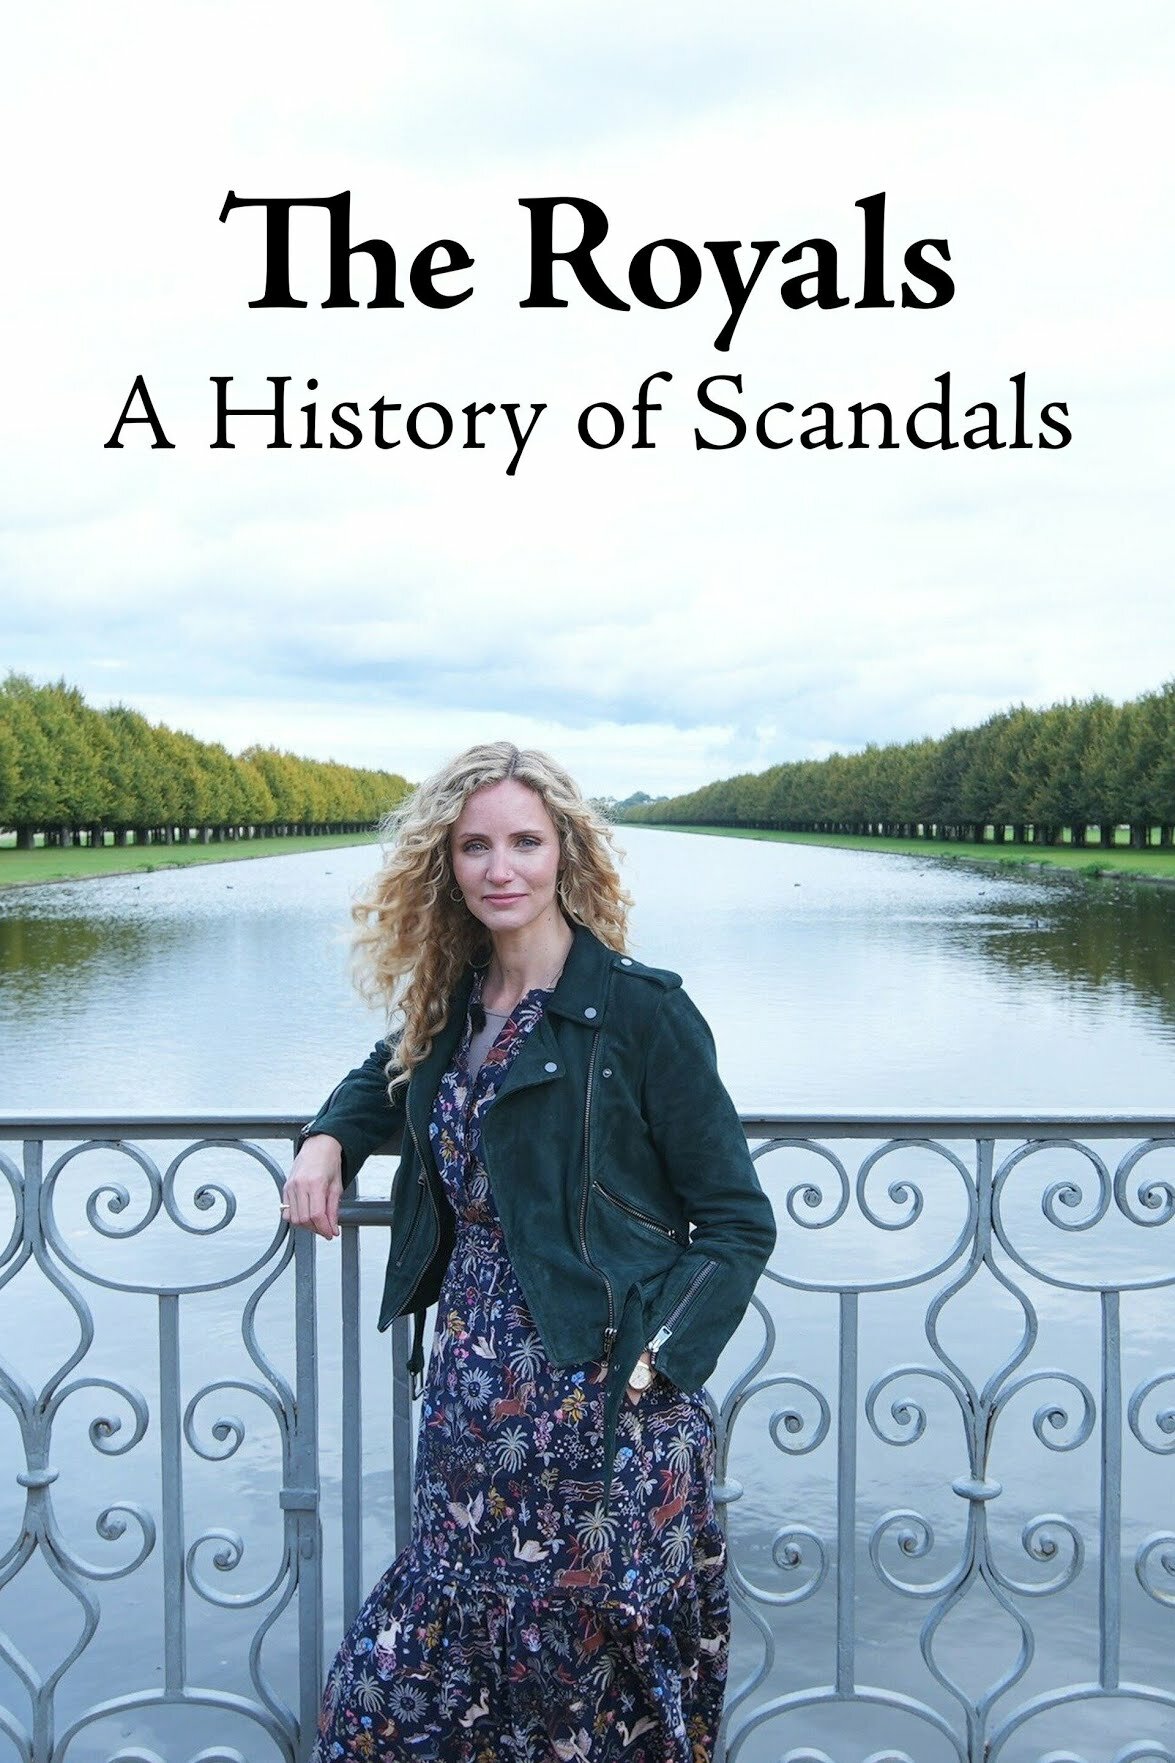 The Royals: A History of Scandals ne zaman